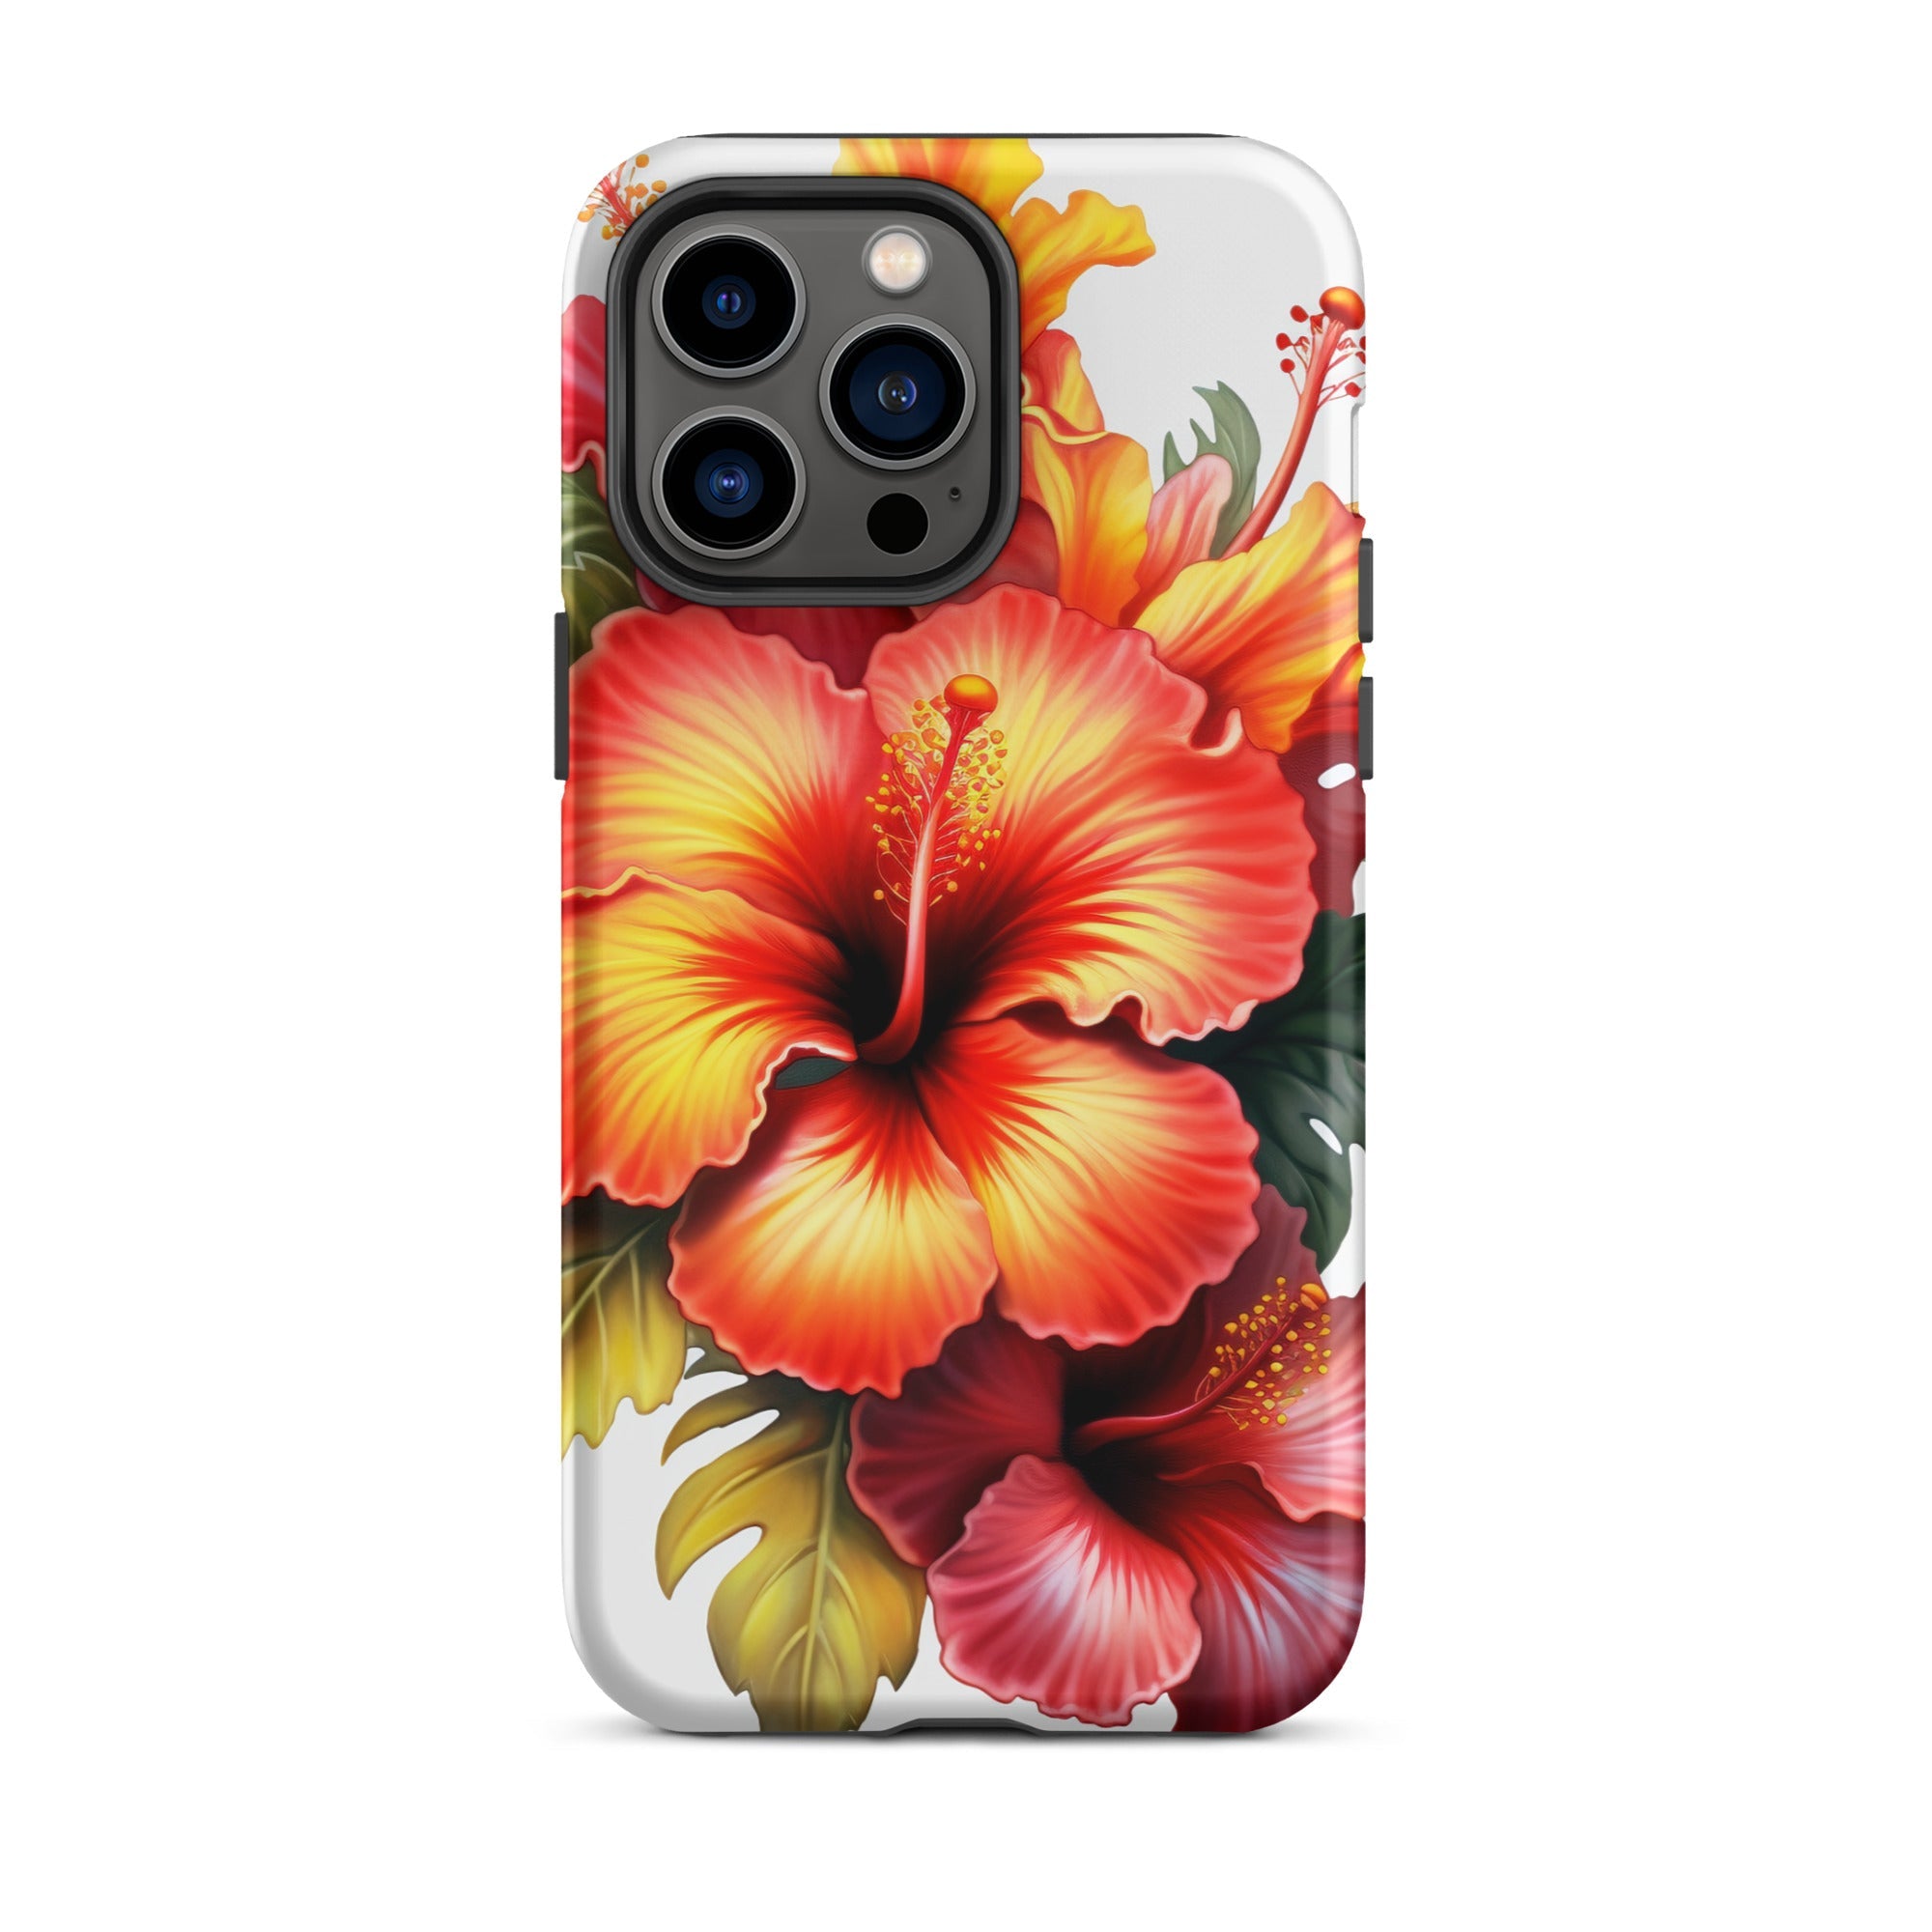 Hibiscus Flower iPhone Case by Visual Verse - Image 30